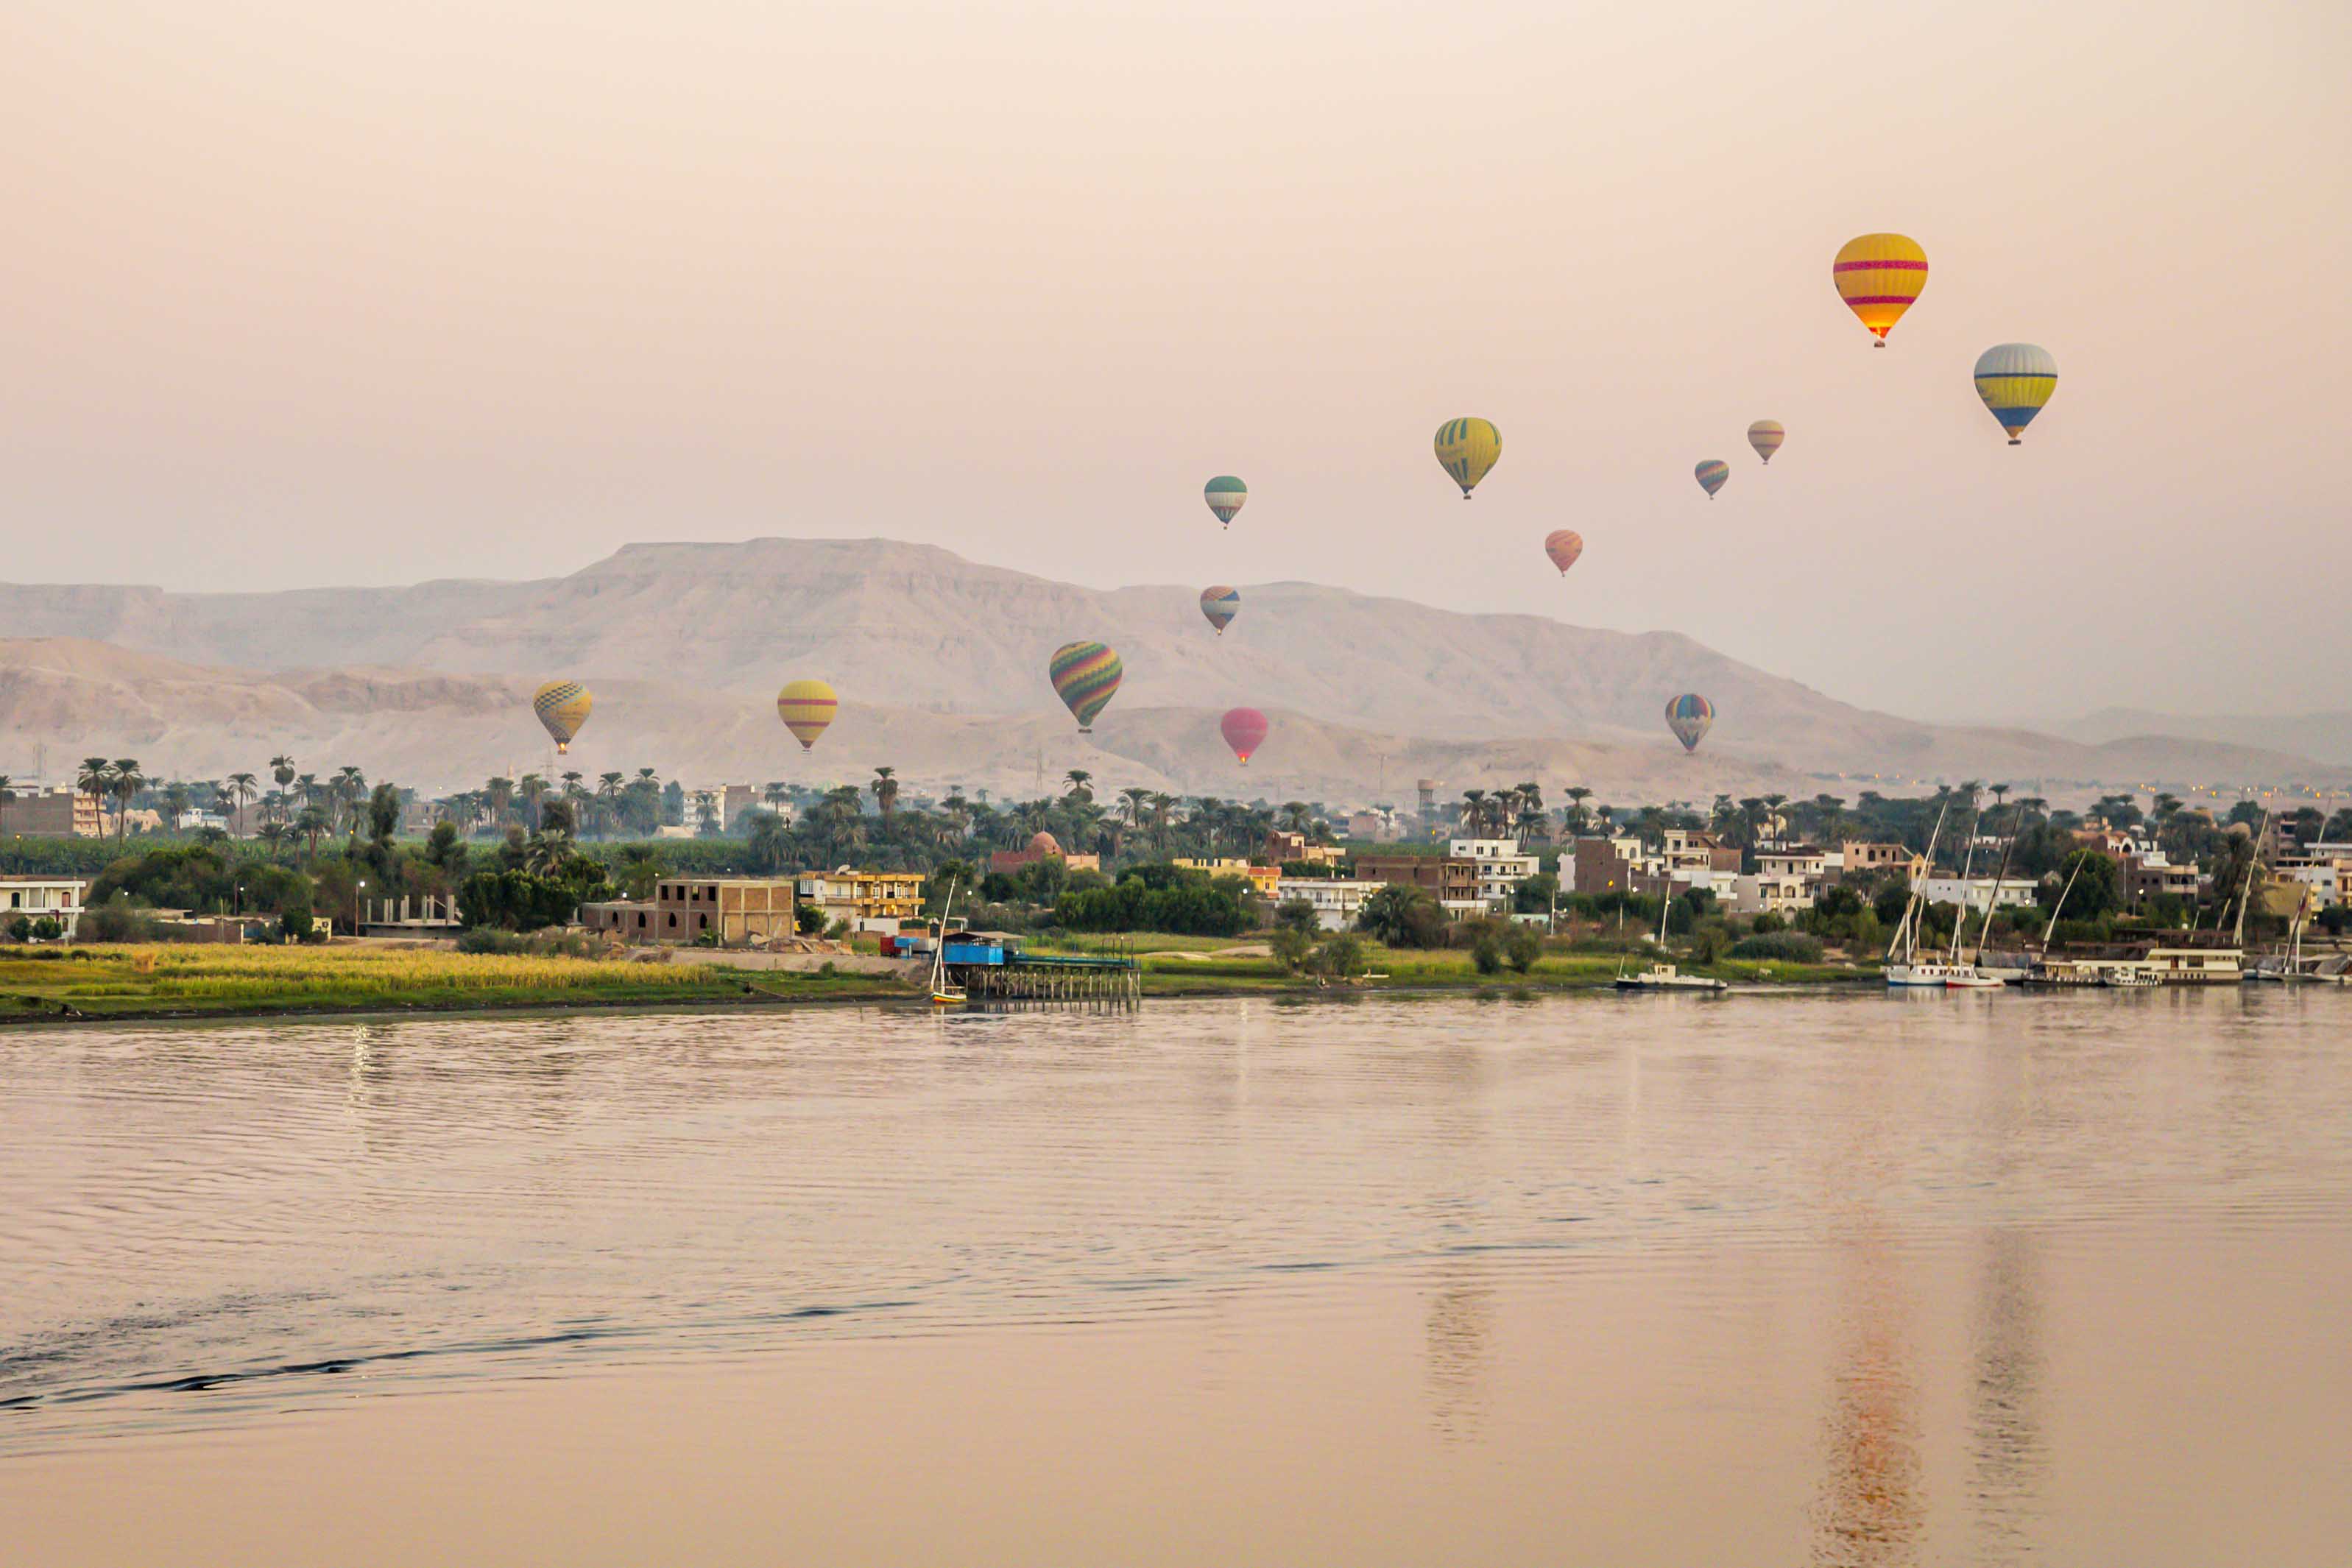 Hot air balloons over the nile